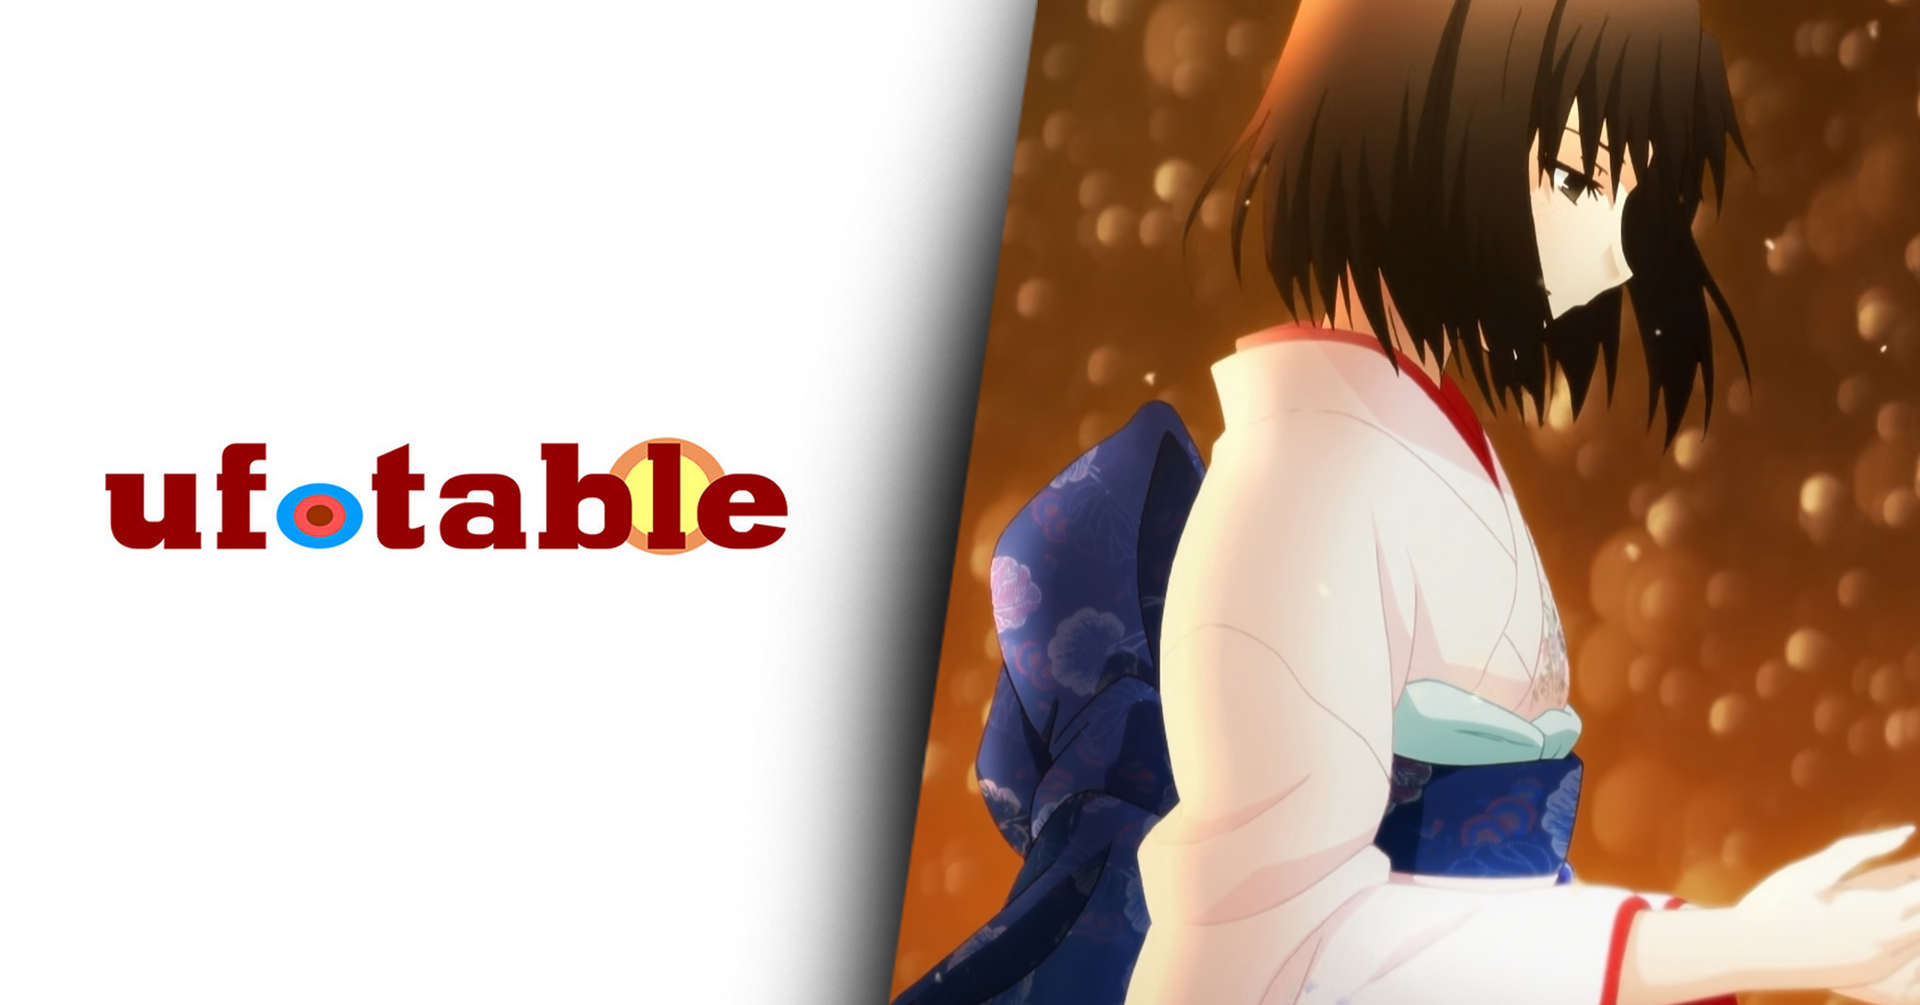 Ufotable Tax Evasion: One Story of Industry Problems - Anime Corner